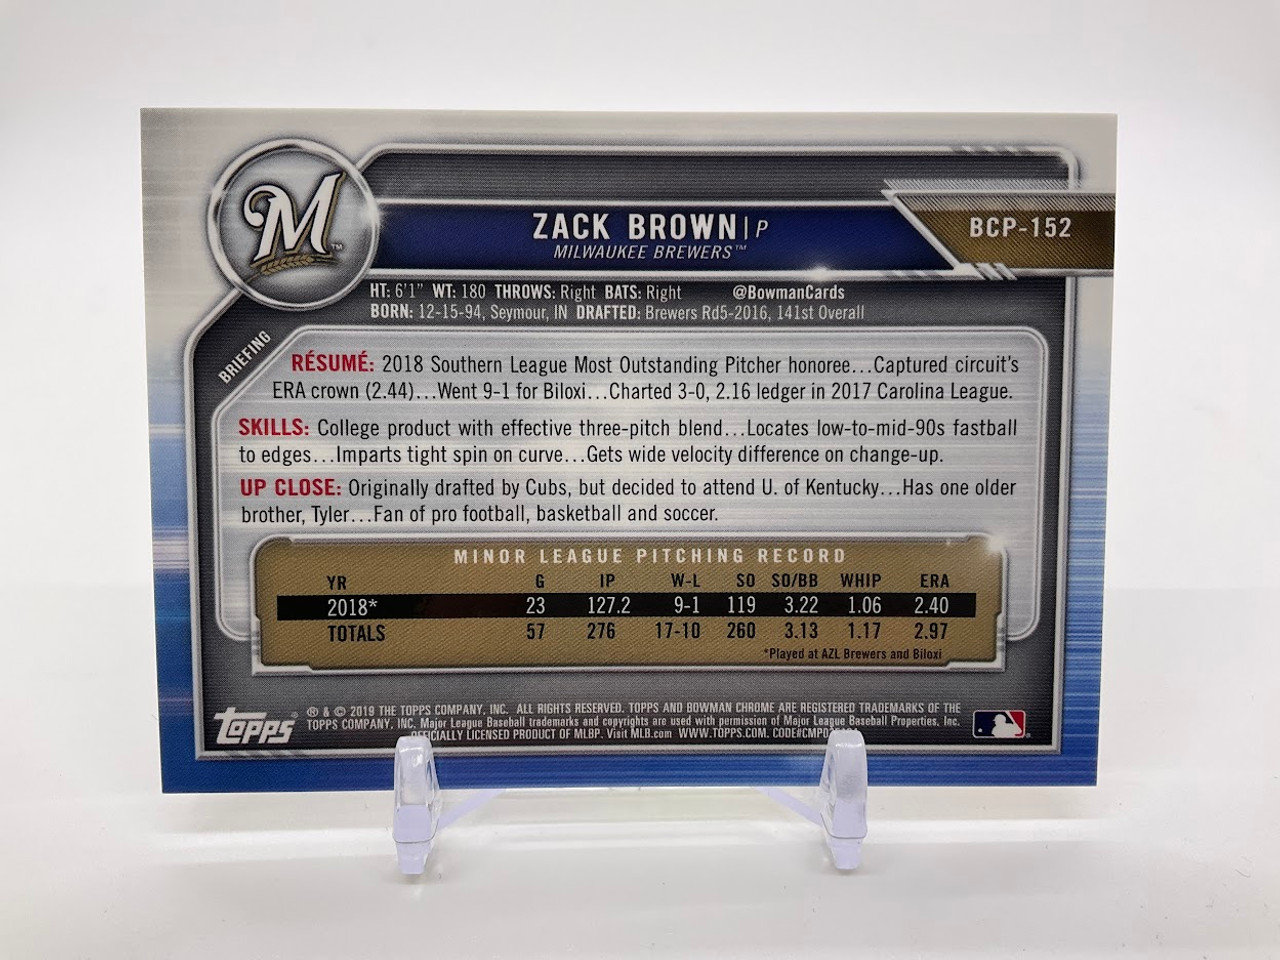 Zack Brown 2019 Topps Bowman Gold Shimmer Chrome 45/50 #BCP-152 Milwaukee Brewers